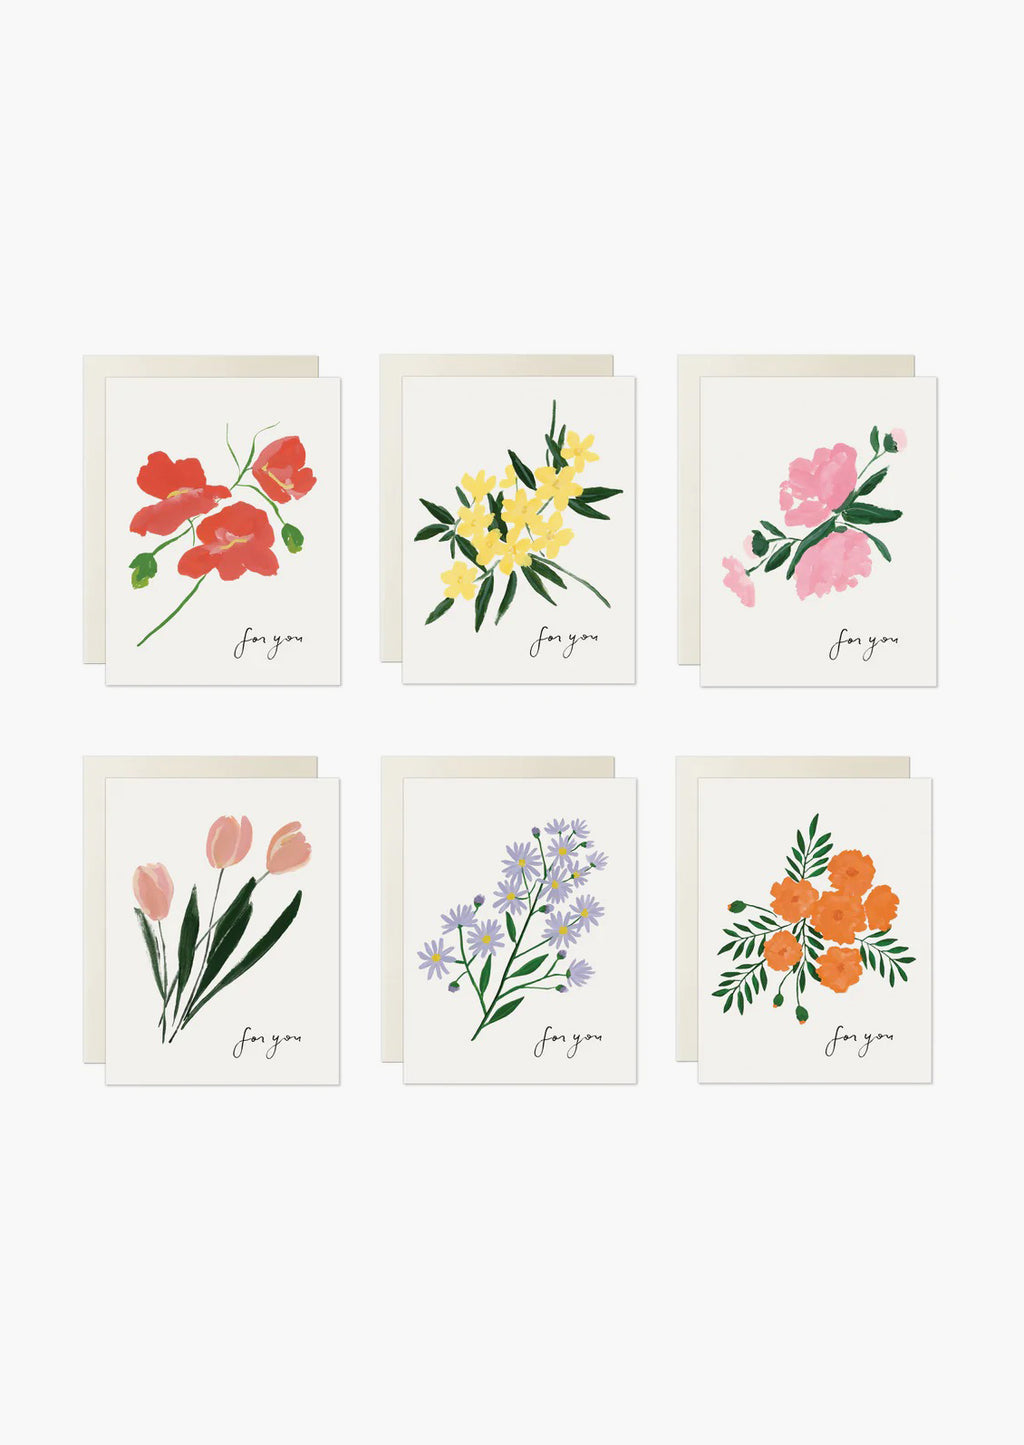 2: A set of white greeting cards in assorted floral prints with text at corner reading "for you".